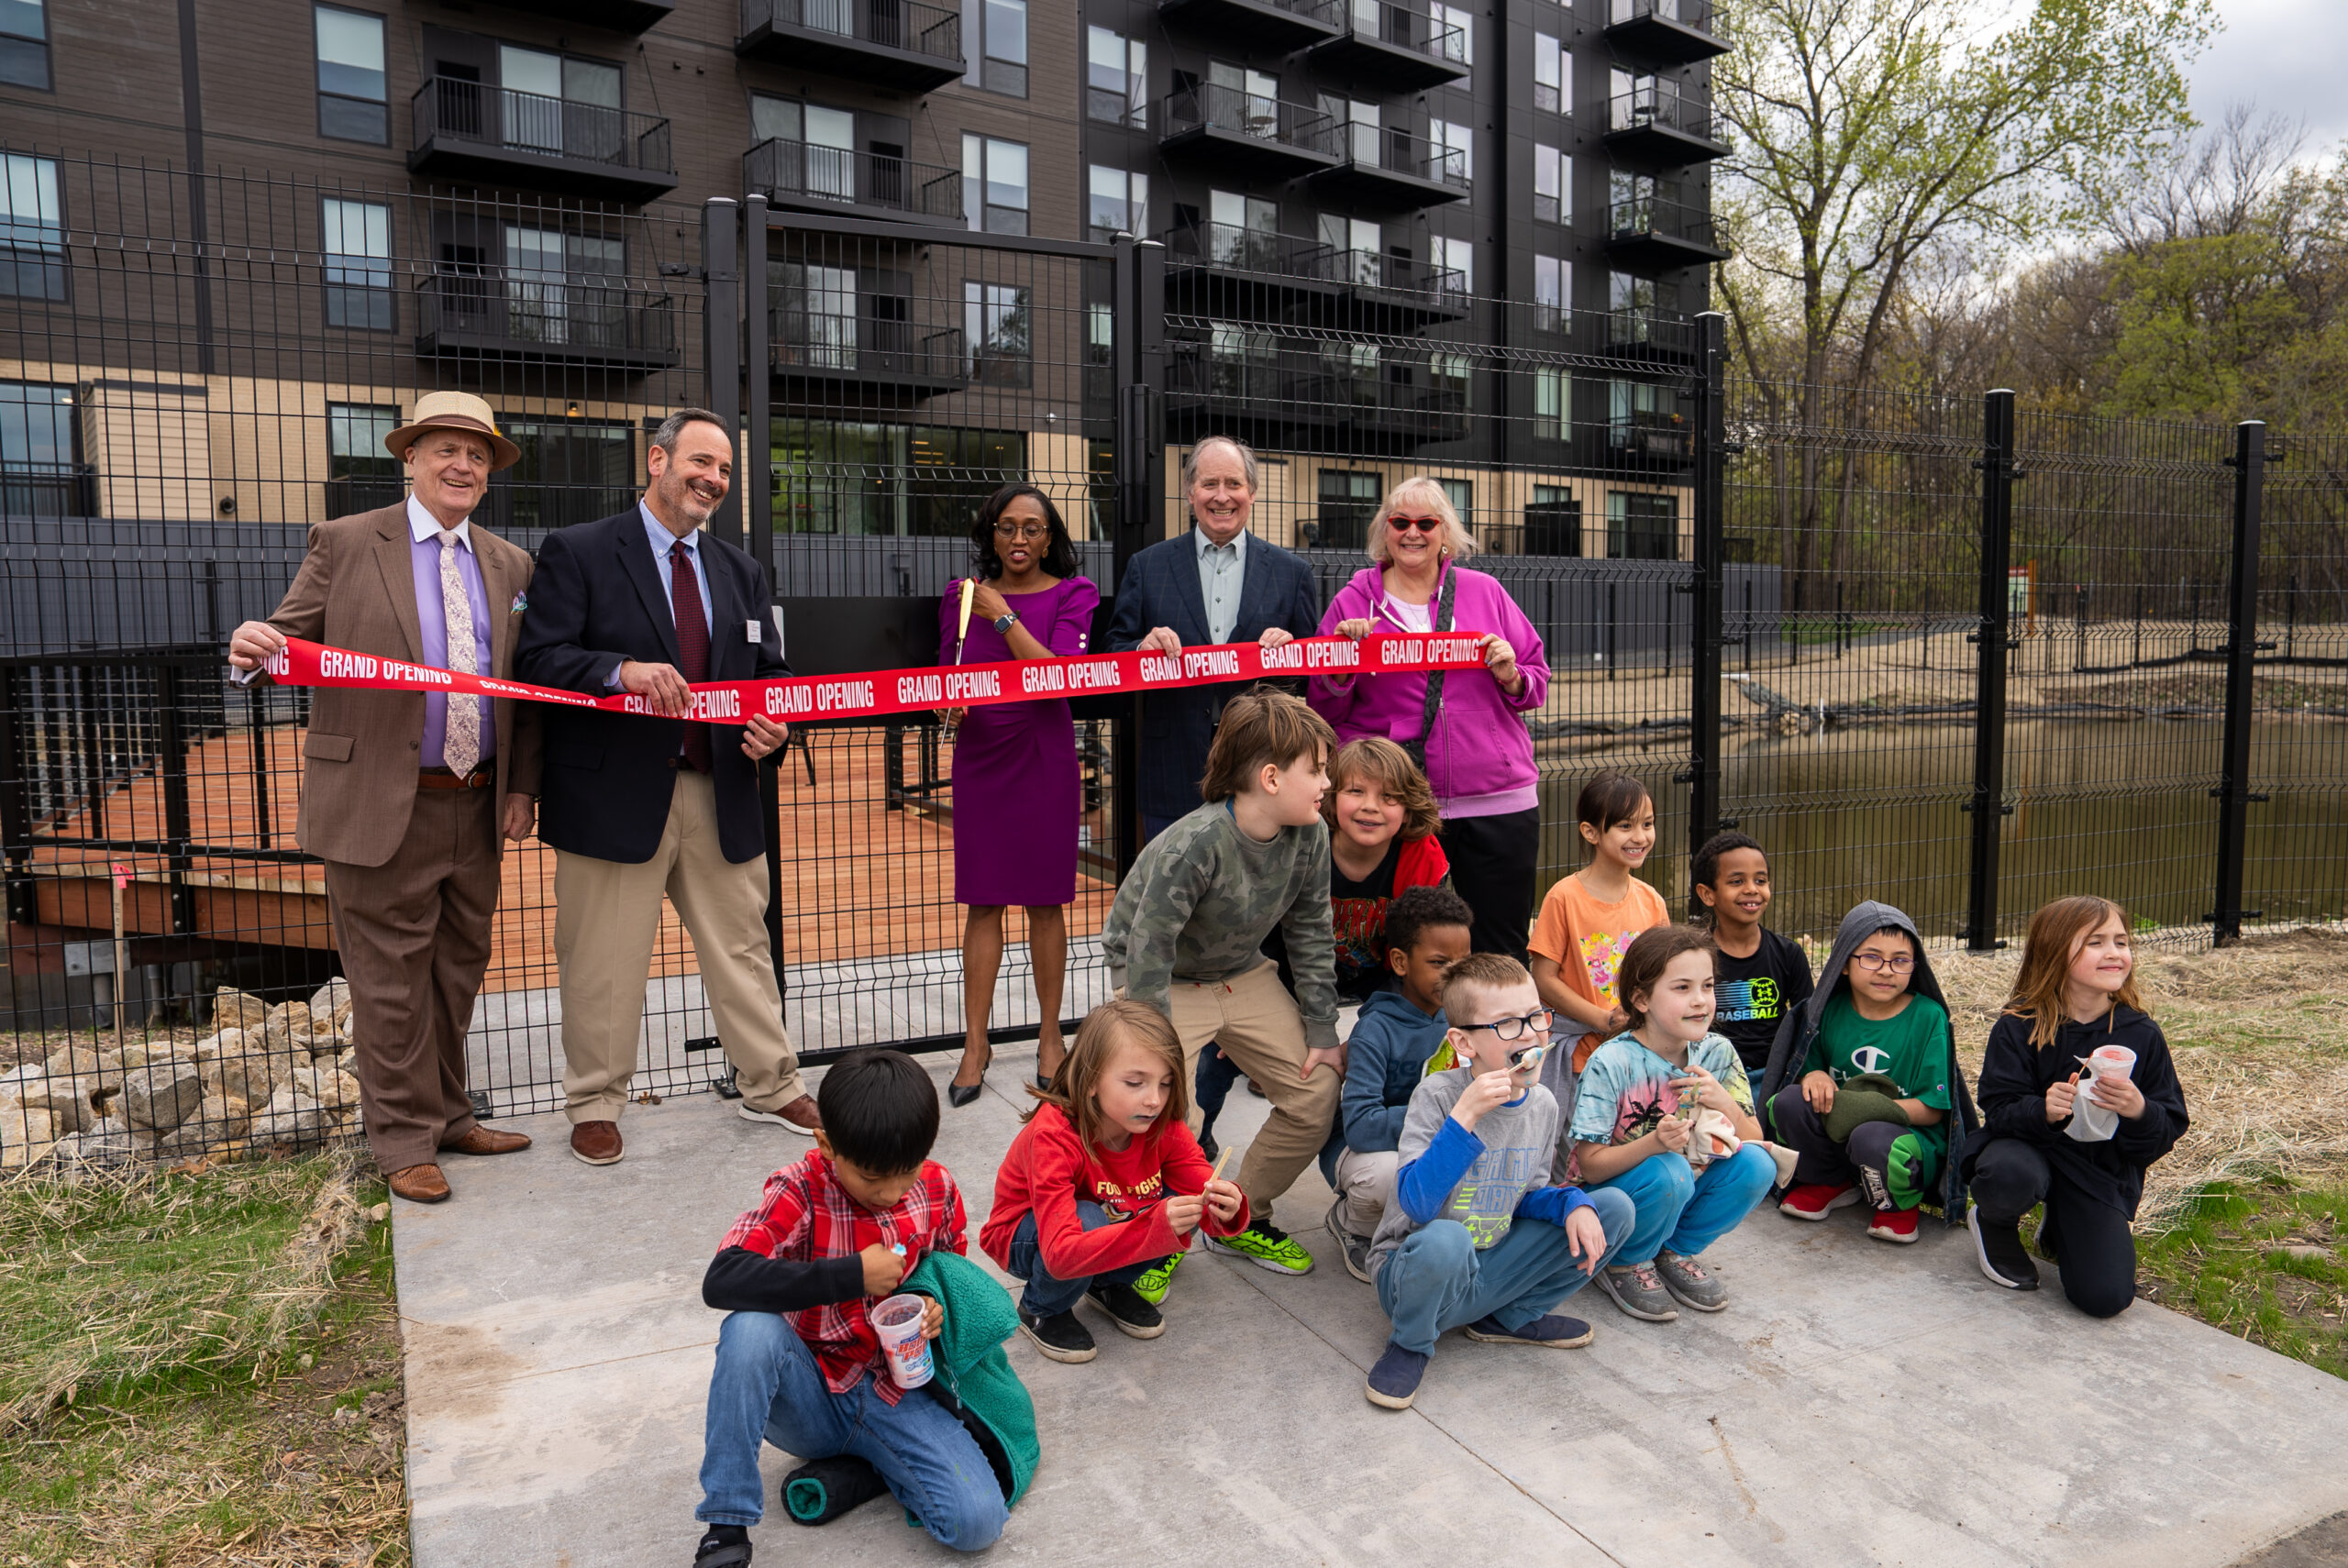 Minneapolis Public Schools Superintendent and Wirth on the Woods project partners cut a ribbon to open a stormwater pond and outdoor learning classroom.